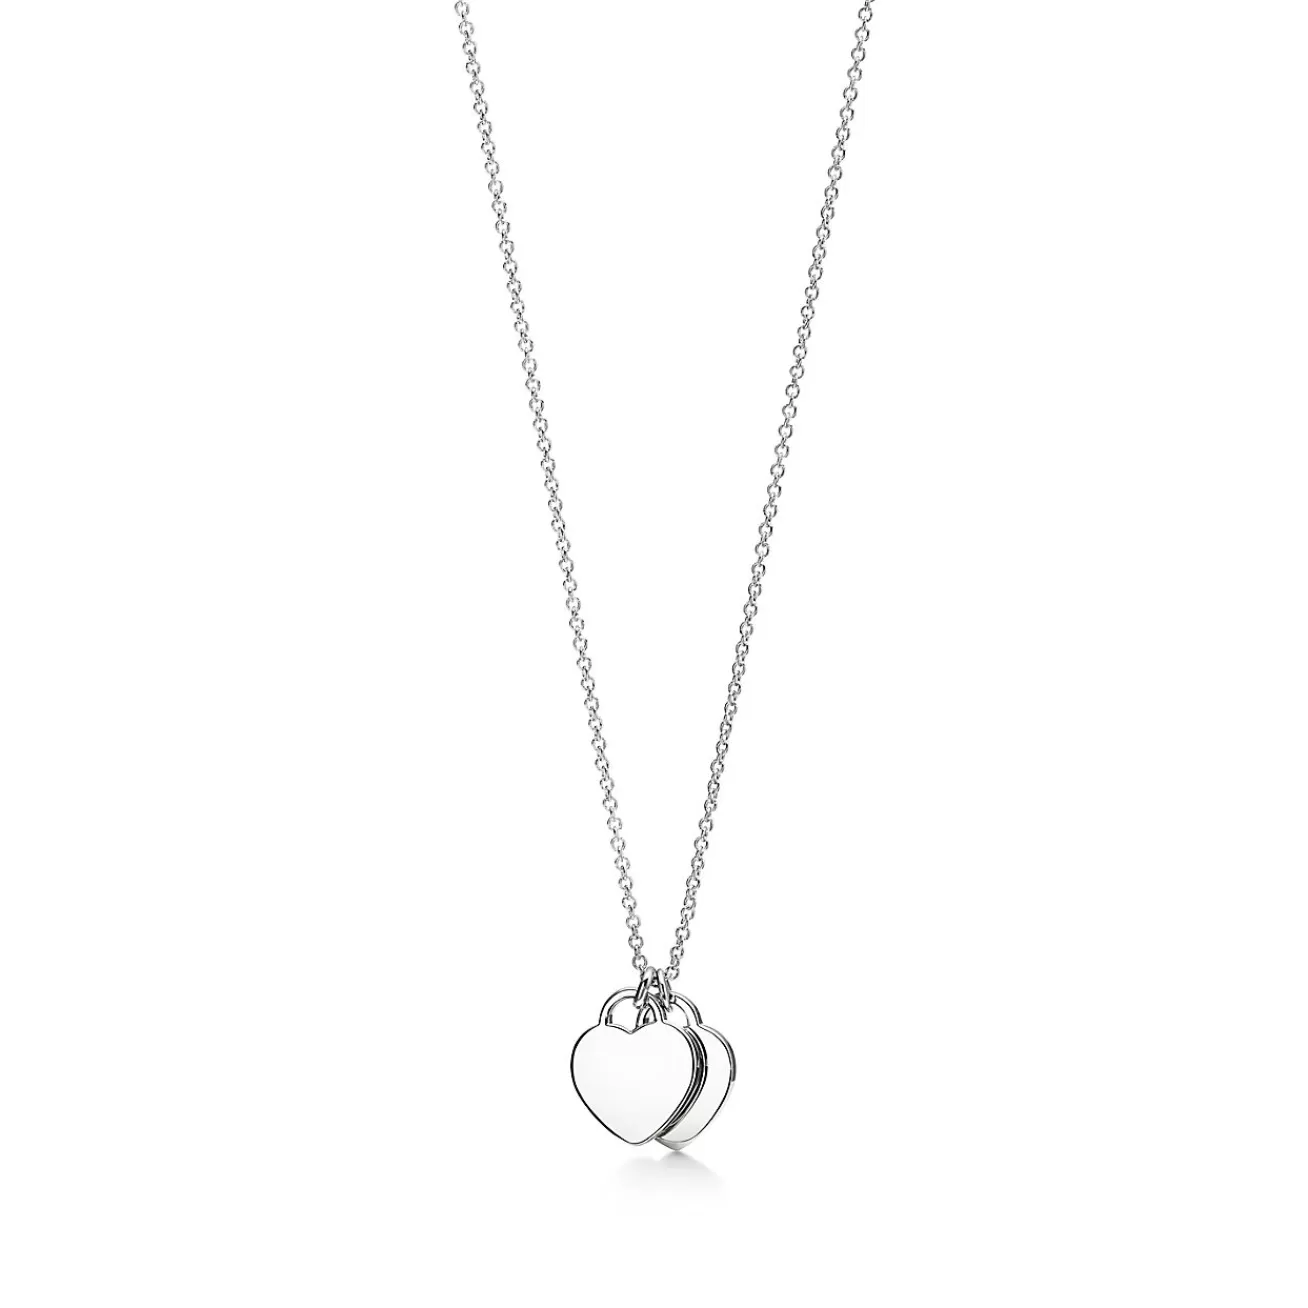 Tiffany & Co. Return to Tiffany® Heart Tag Pendant in Sterling Silver with a Diamond, Mini | ^ Necklaces & Pendants | Dainty Jewelry